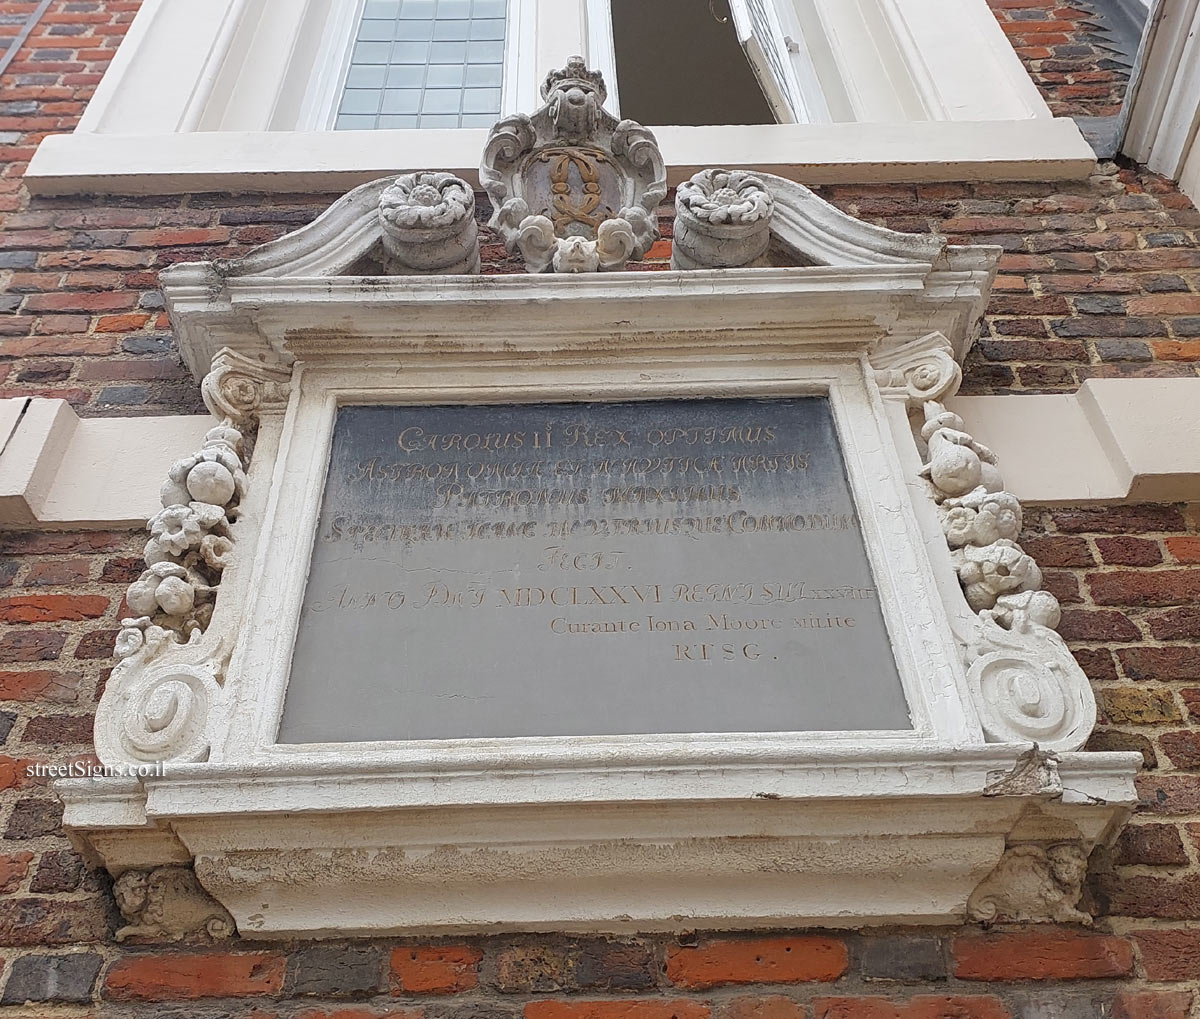 London - Greenwich - The Dedication Plaque of Flamsteed House - Flamsteed House and Harrison’s Sea Clocks, The Avenue, London SE10 8XJ, UK